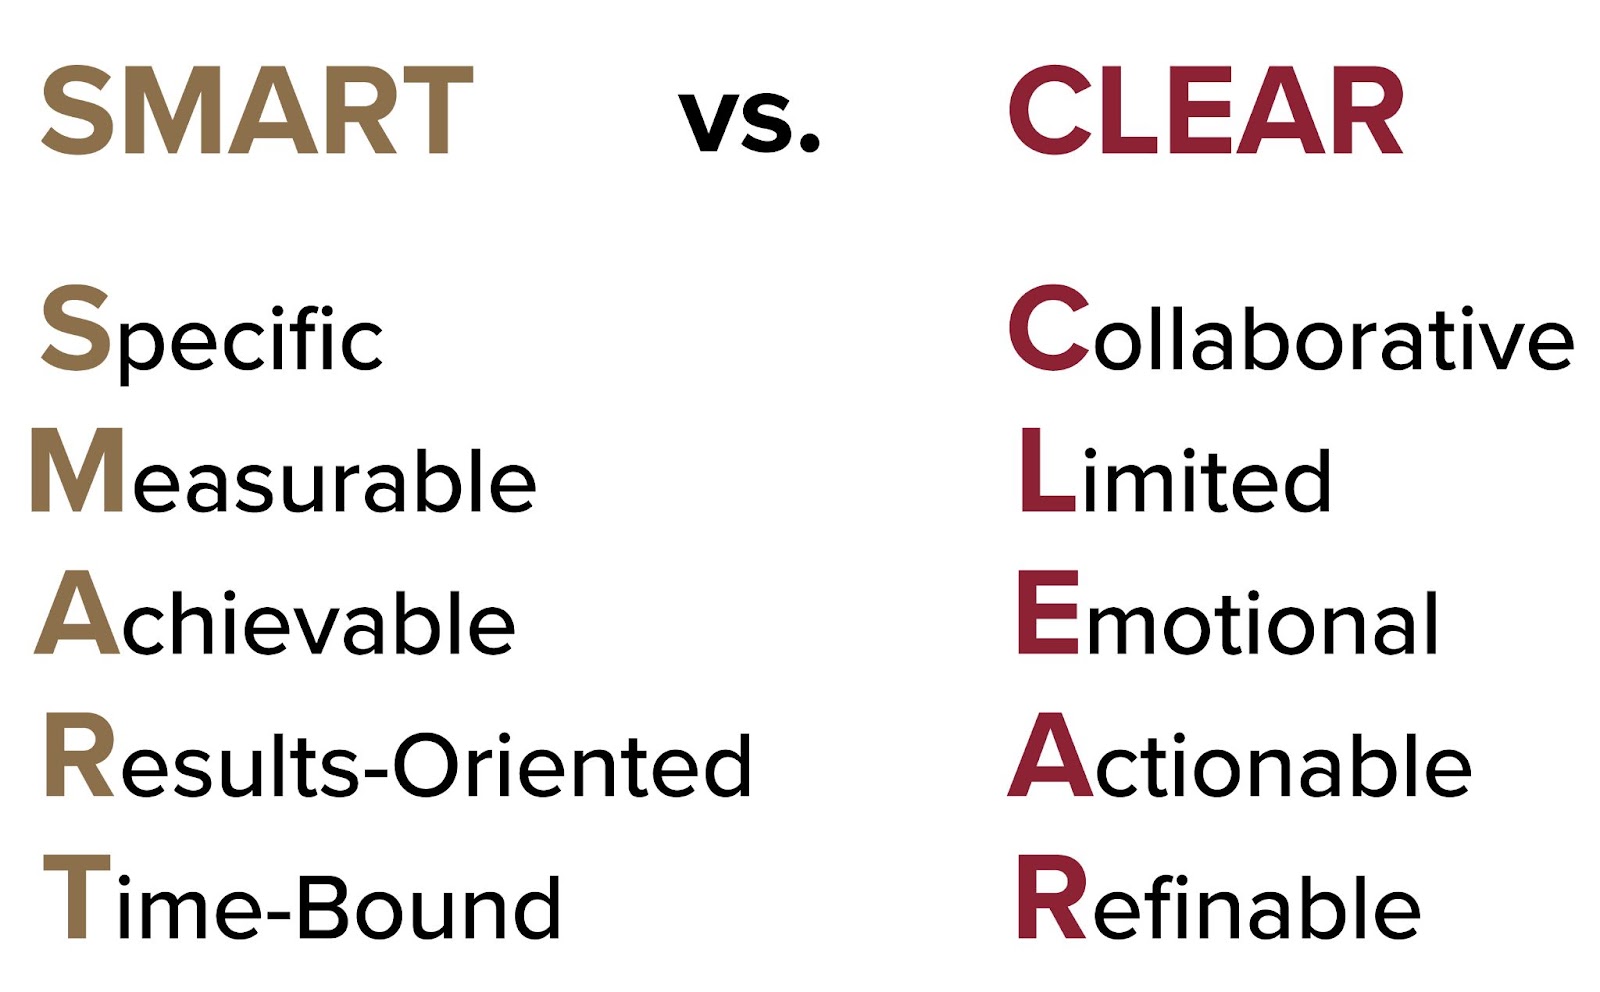 An image about SMART vs. CLEAR goals in project management.